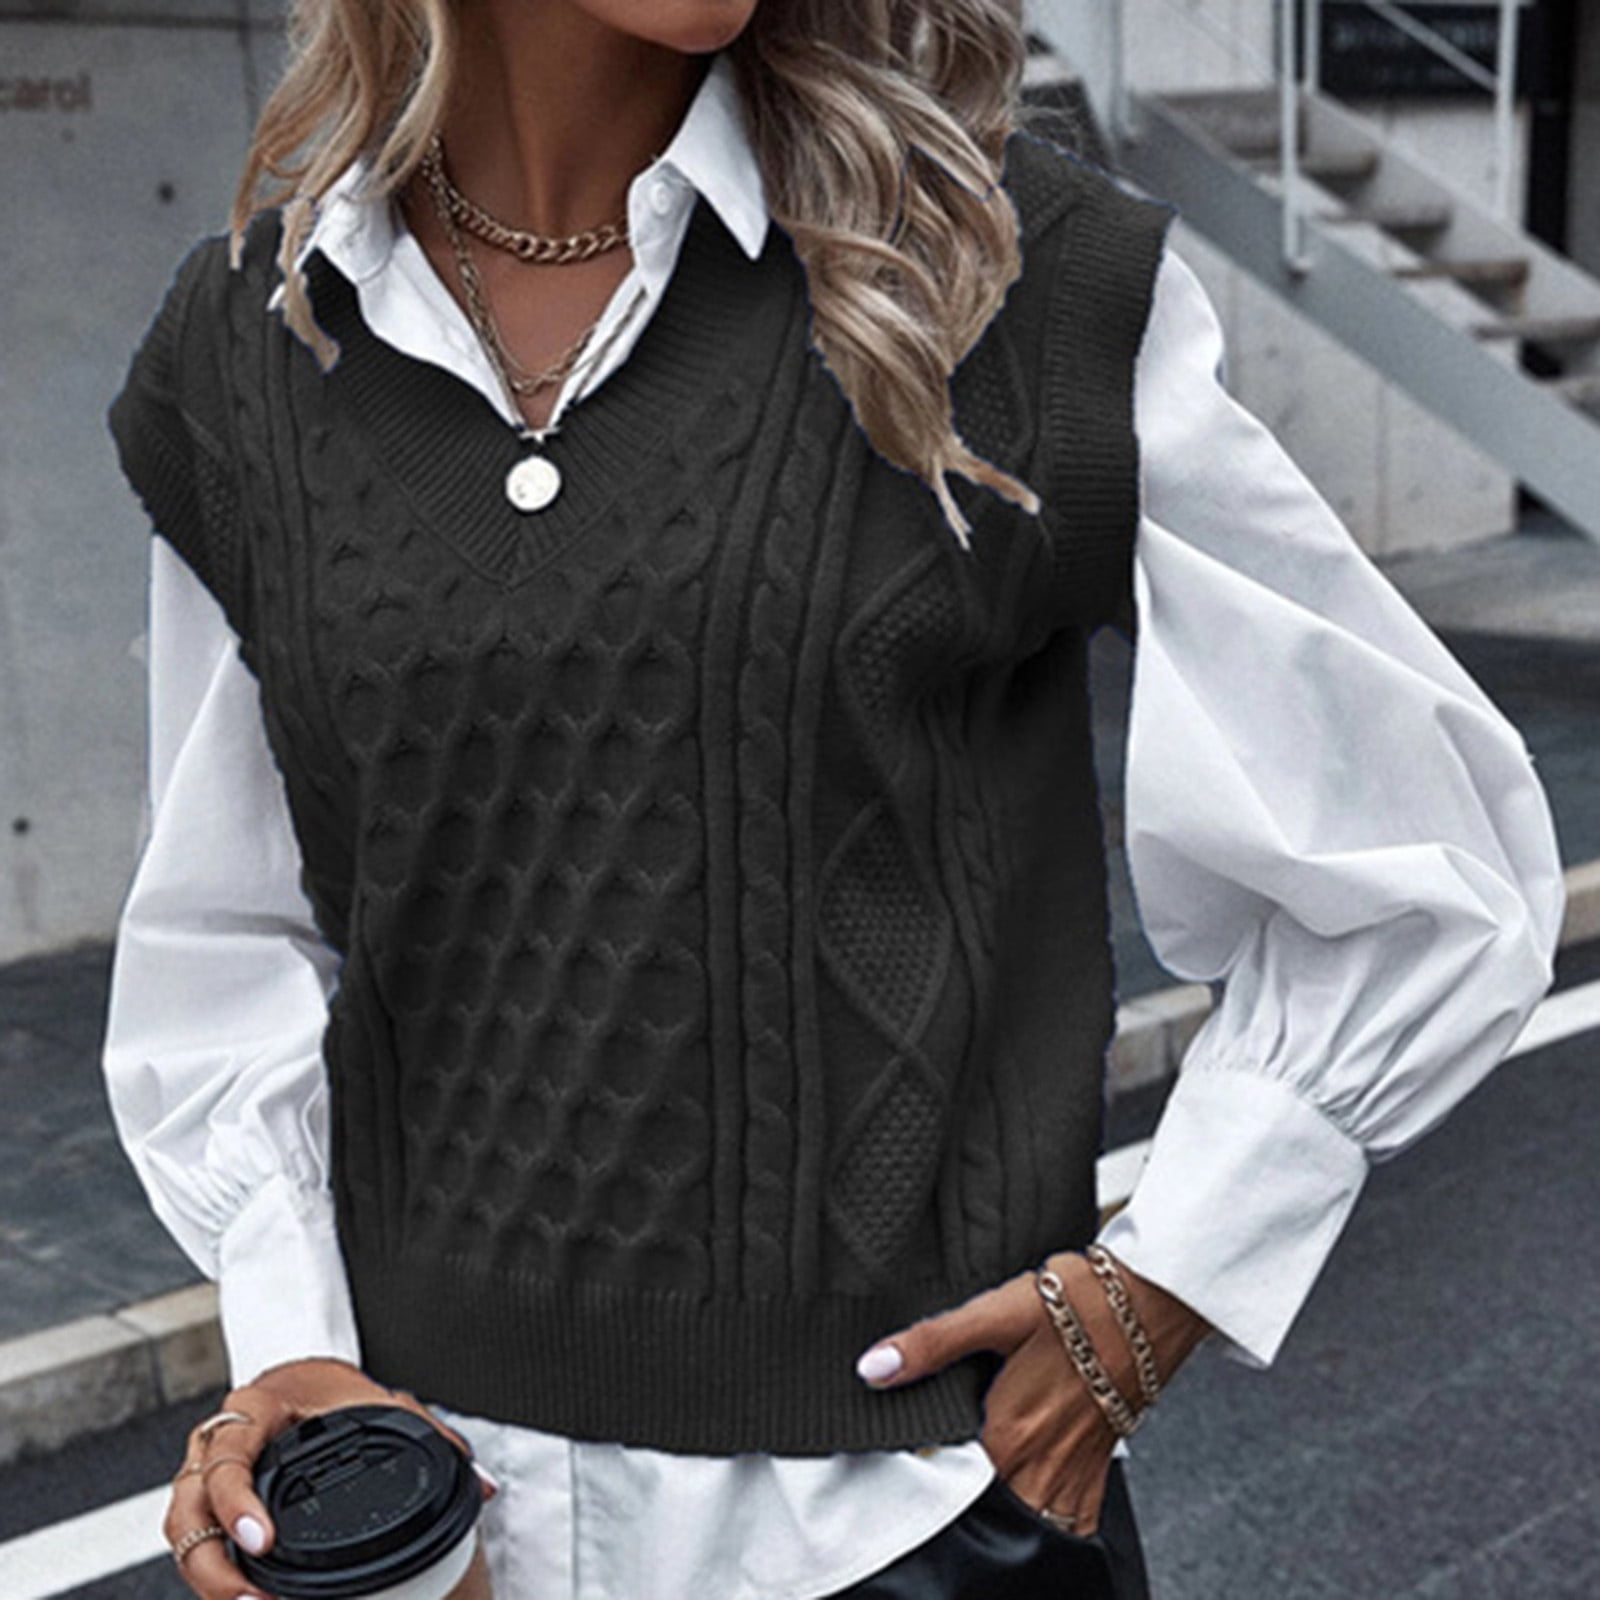 Stylish Women Casual V-Neck Hollow Diamond Knitted Vest Sweater